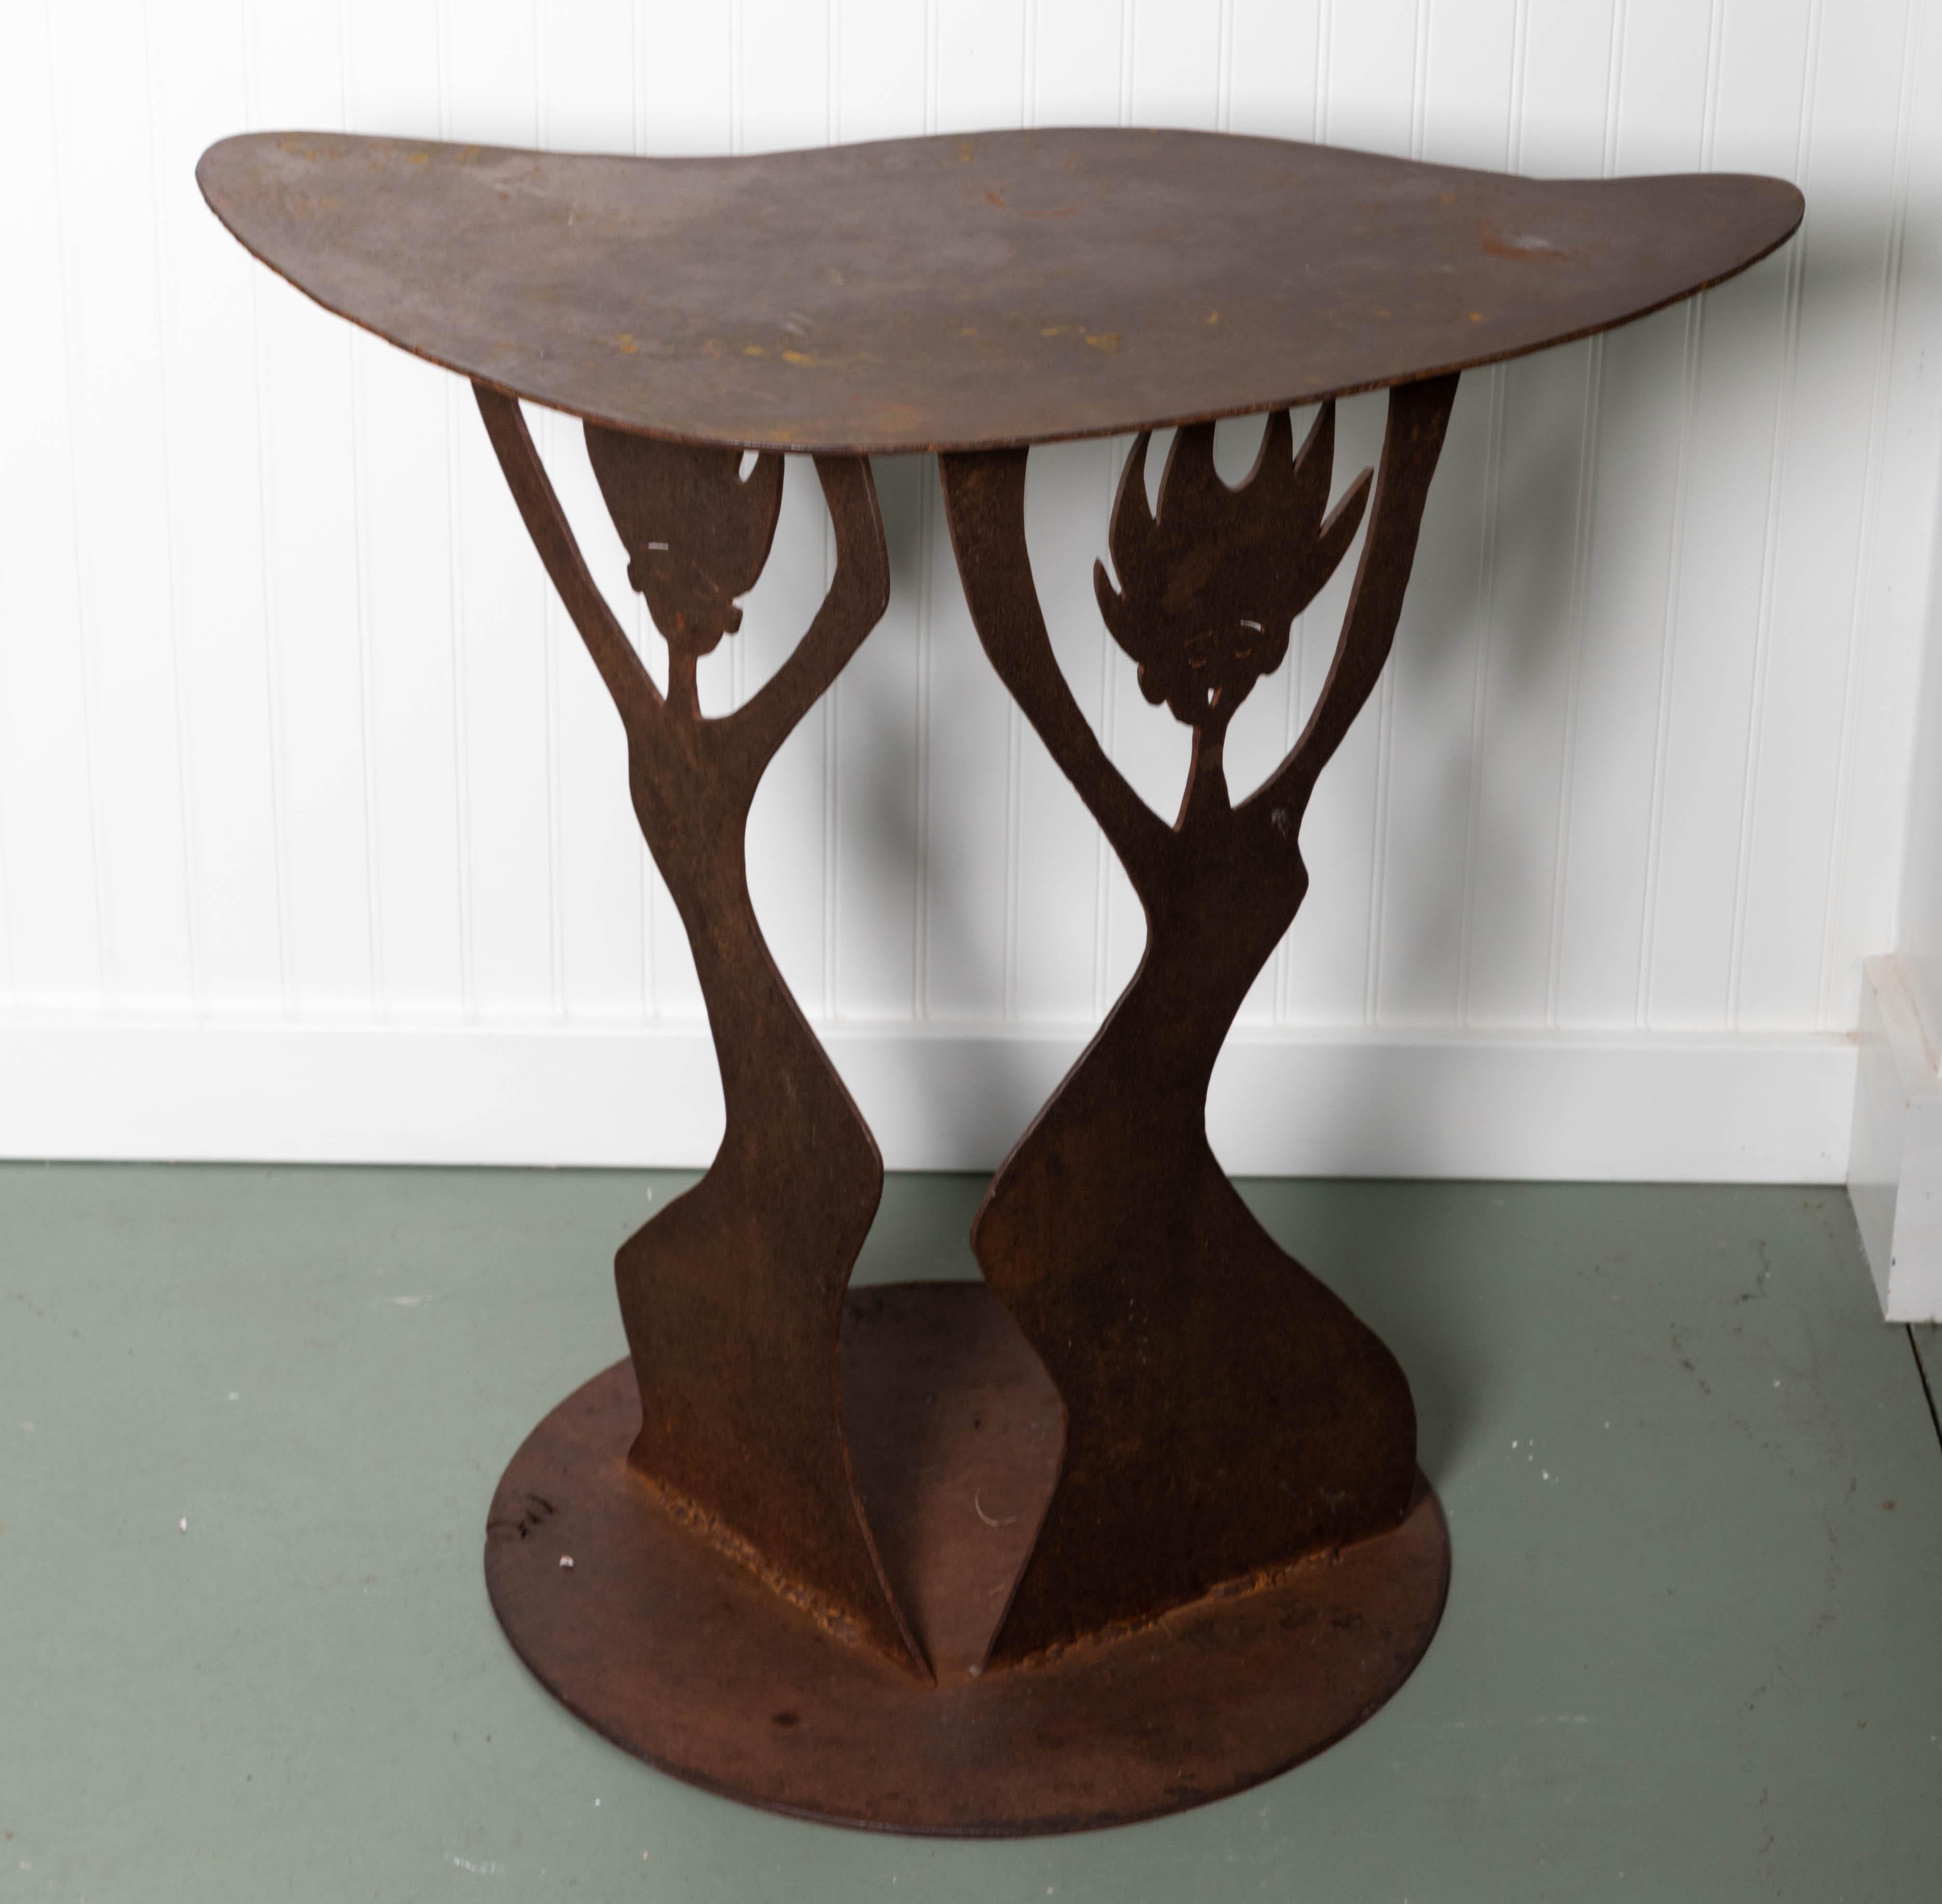 Demilune table handmade, signed MC with figural base. Surface treated to bring out rust color.